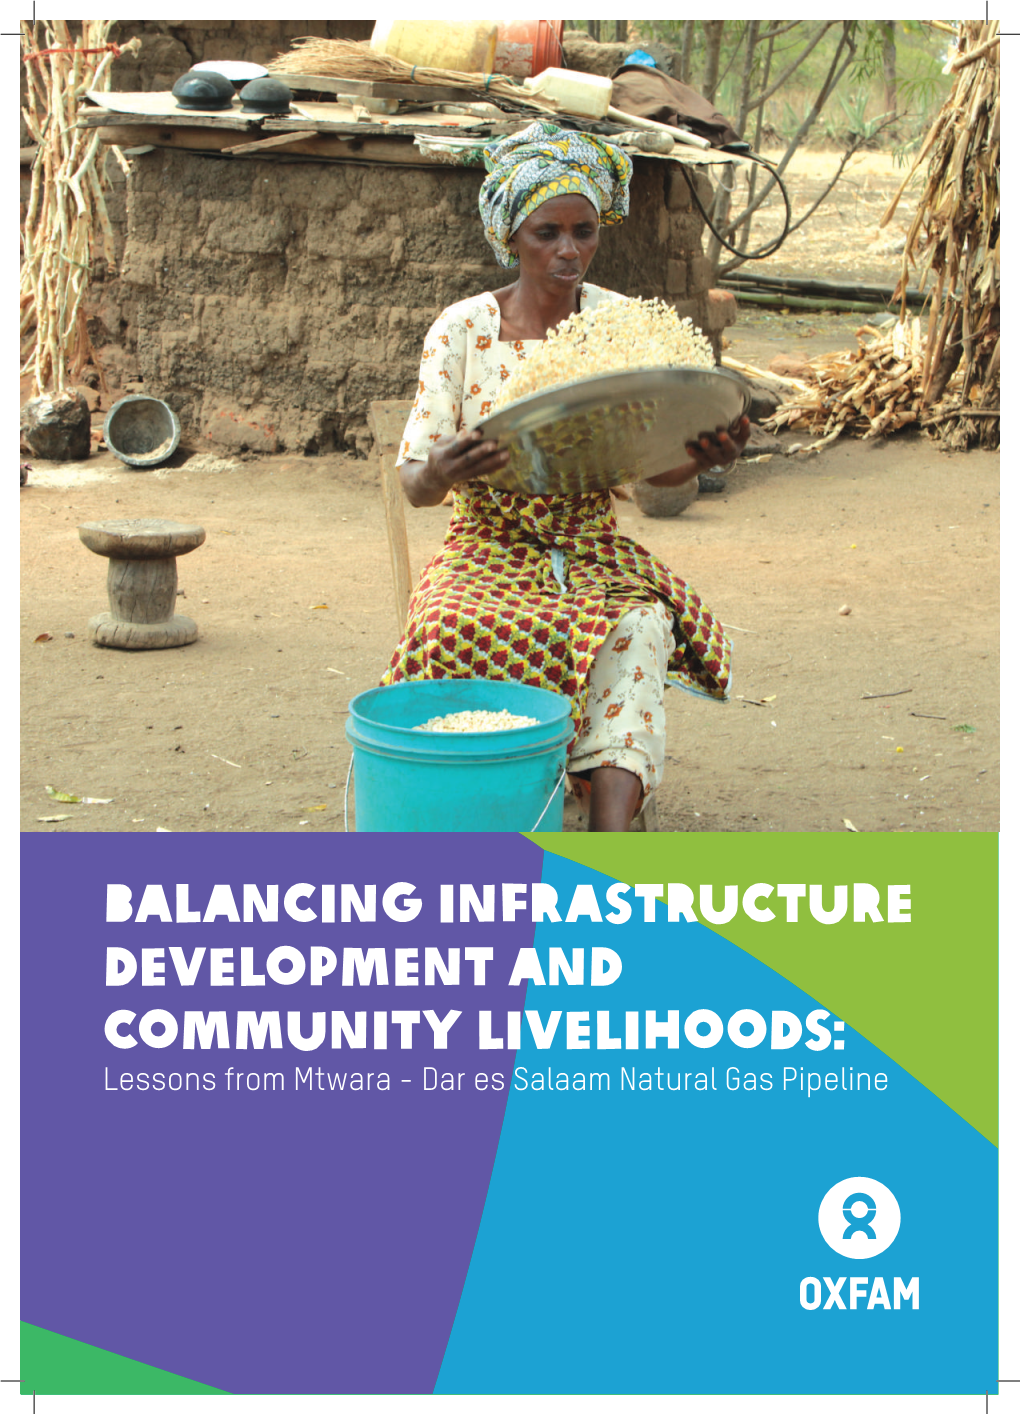 Balancing Infrastructure Development and Community Livelihoods: Lessons from Mtwara - Dar Es Salaam Natural Gas Pipeline